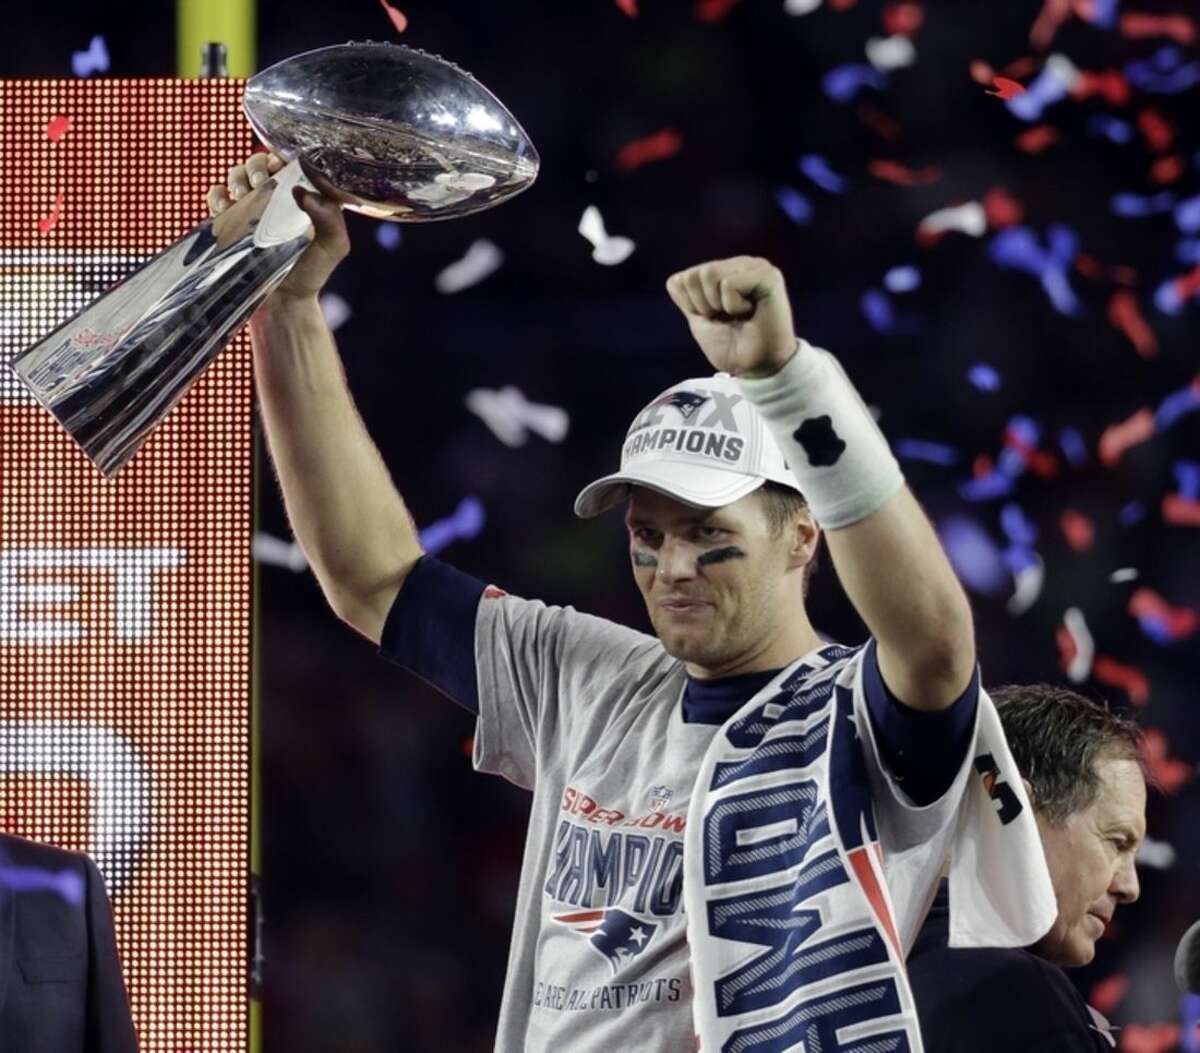 FILE - In a Feb. 1, 2015, file photo New England Patriots quarterback Tom Brady holds up the Vince Lombardi Trophy after the Patriots defeated the Seattle Seahawks 28-24 in NFL Super Bowl XLIX in Glendale, Ariz. The NFL Monday, May 11, 2015, suspended Super Bowl MVP Brady for the first four games of the season. (AP Photo/Mark Humphrey)